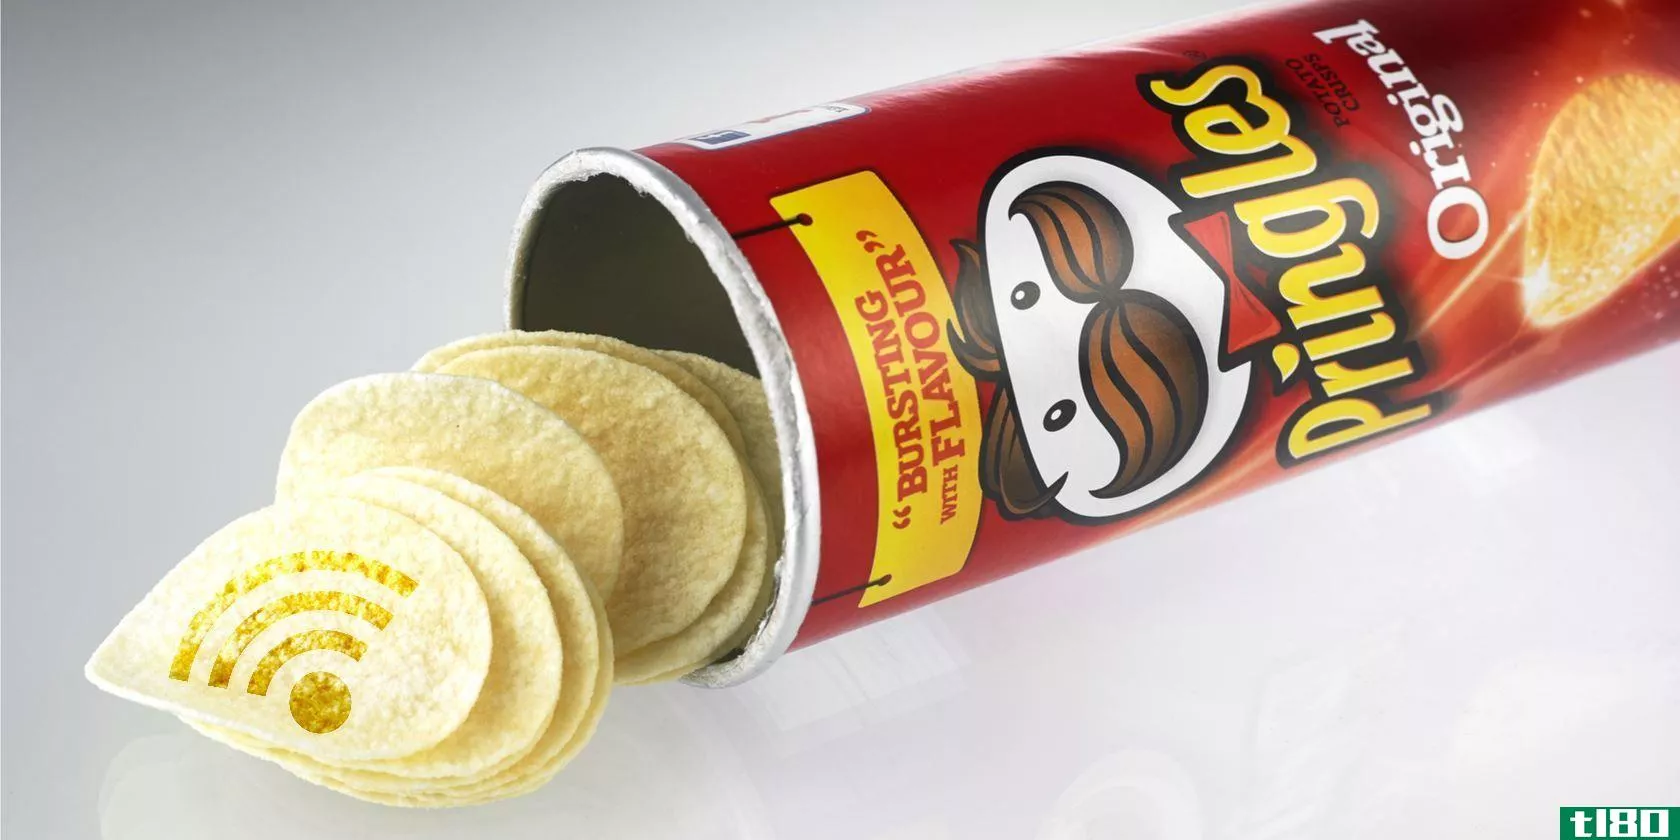 pringles-can-wifi-extender-featured